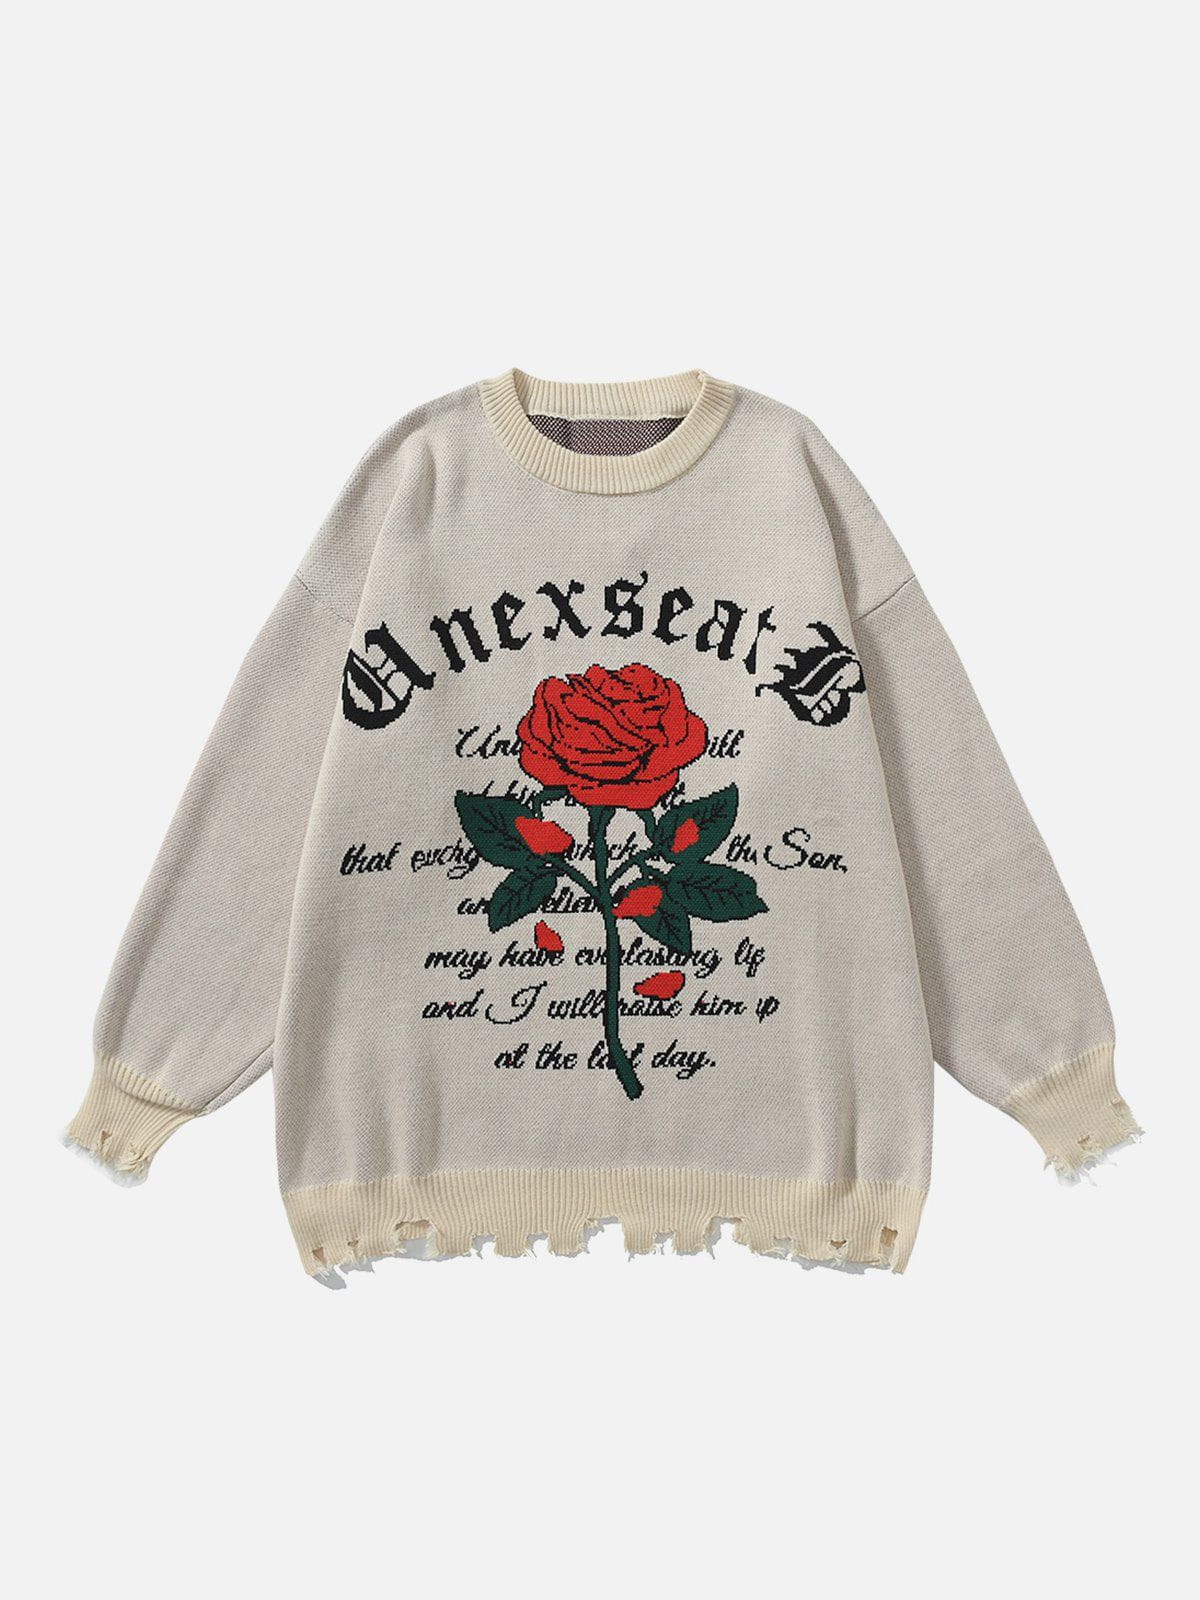 Majesda® - Rose Embroidered Raw Edge Sweater outfit ideas streetwear fashion